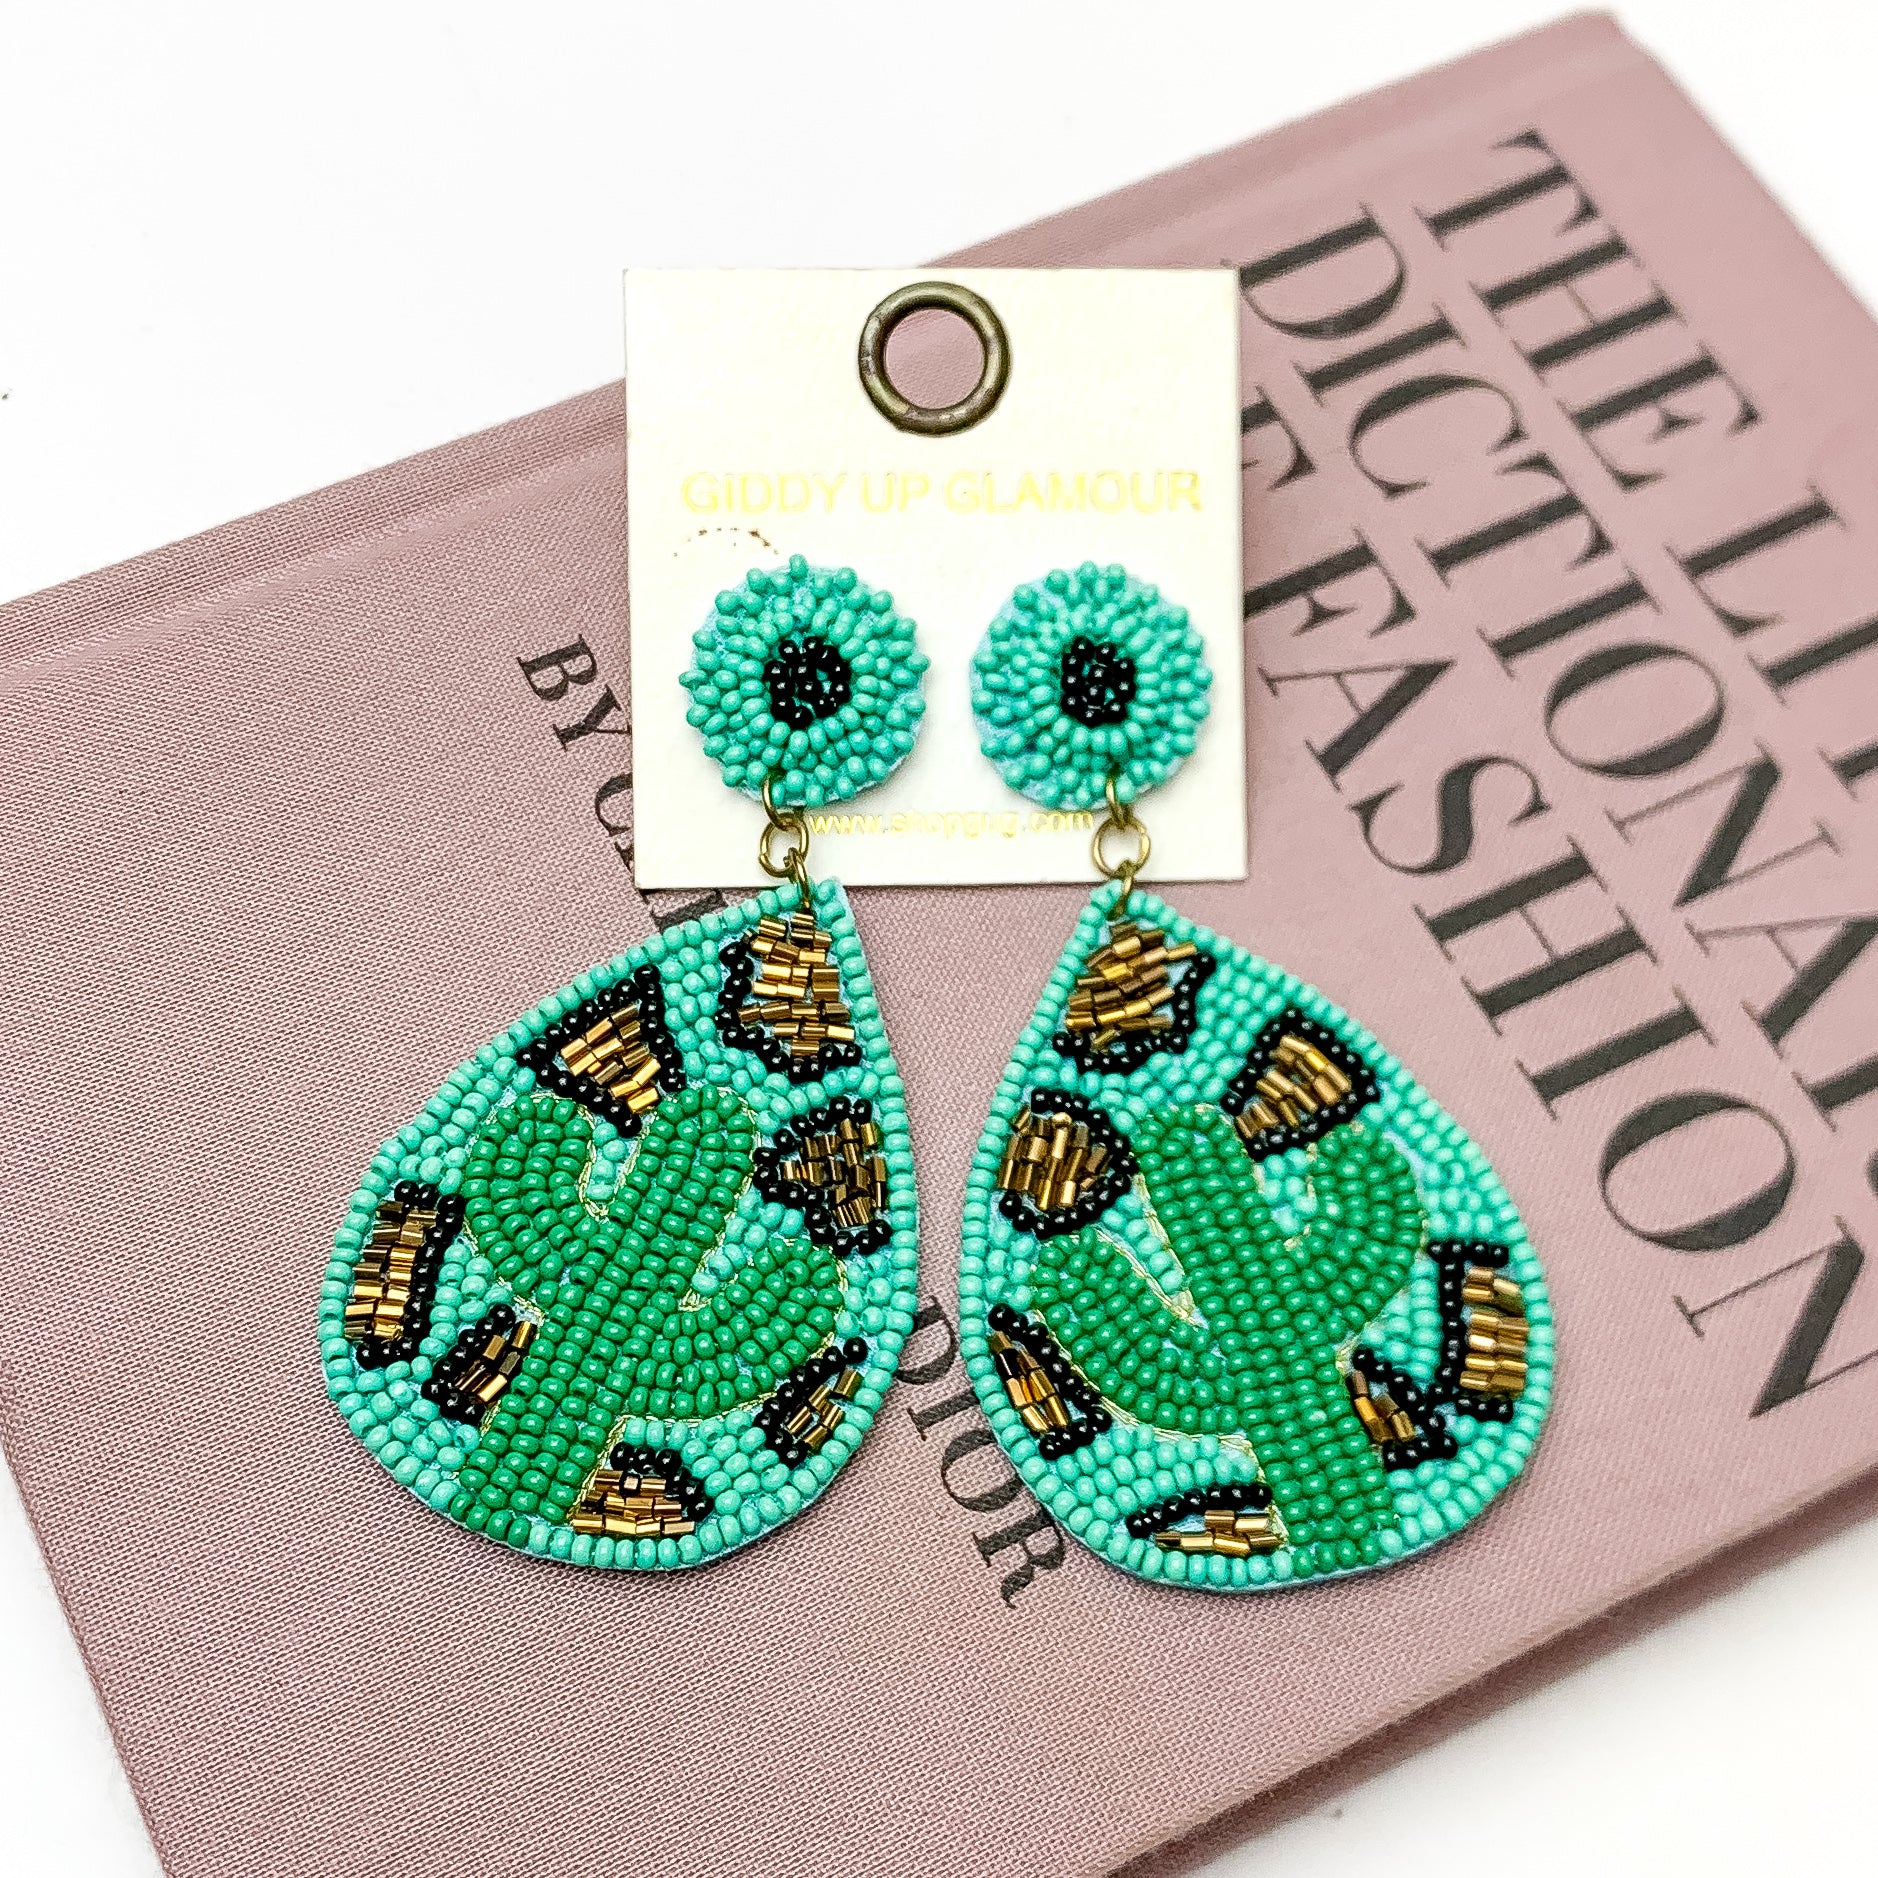 Cactus and Leopard Print Seed Bead Teardrop Earrings In Turquoise Green and Green - Giddy Up Glamour Boutique